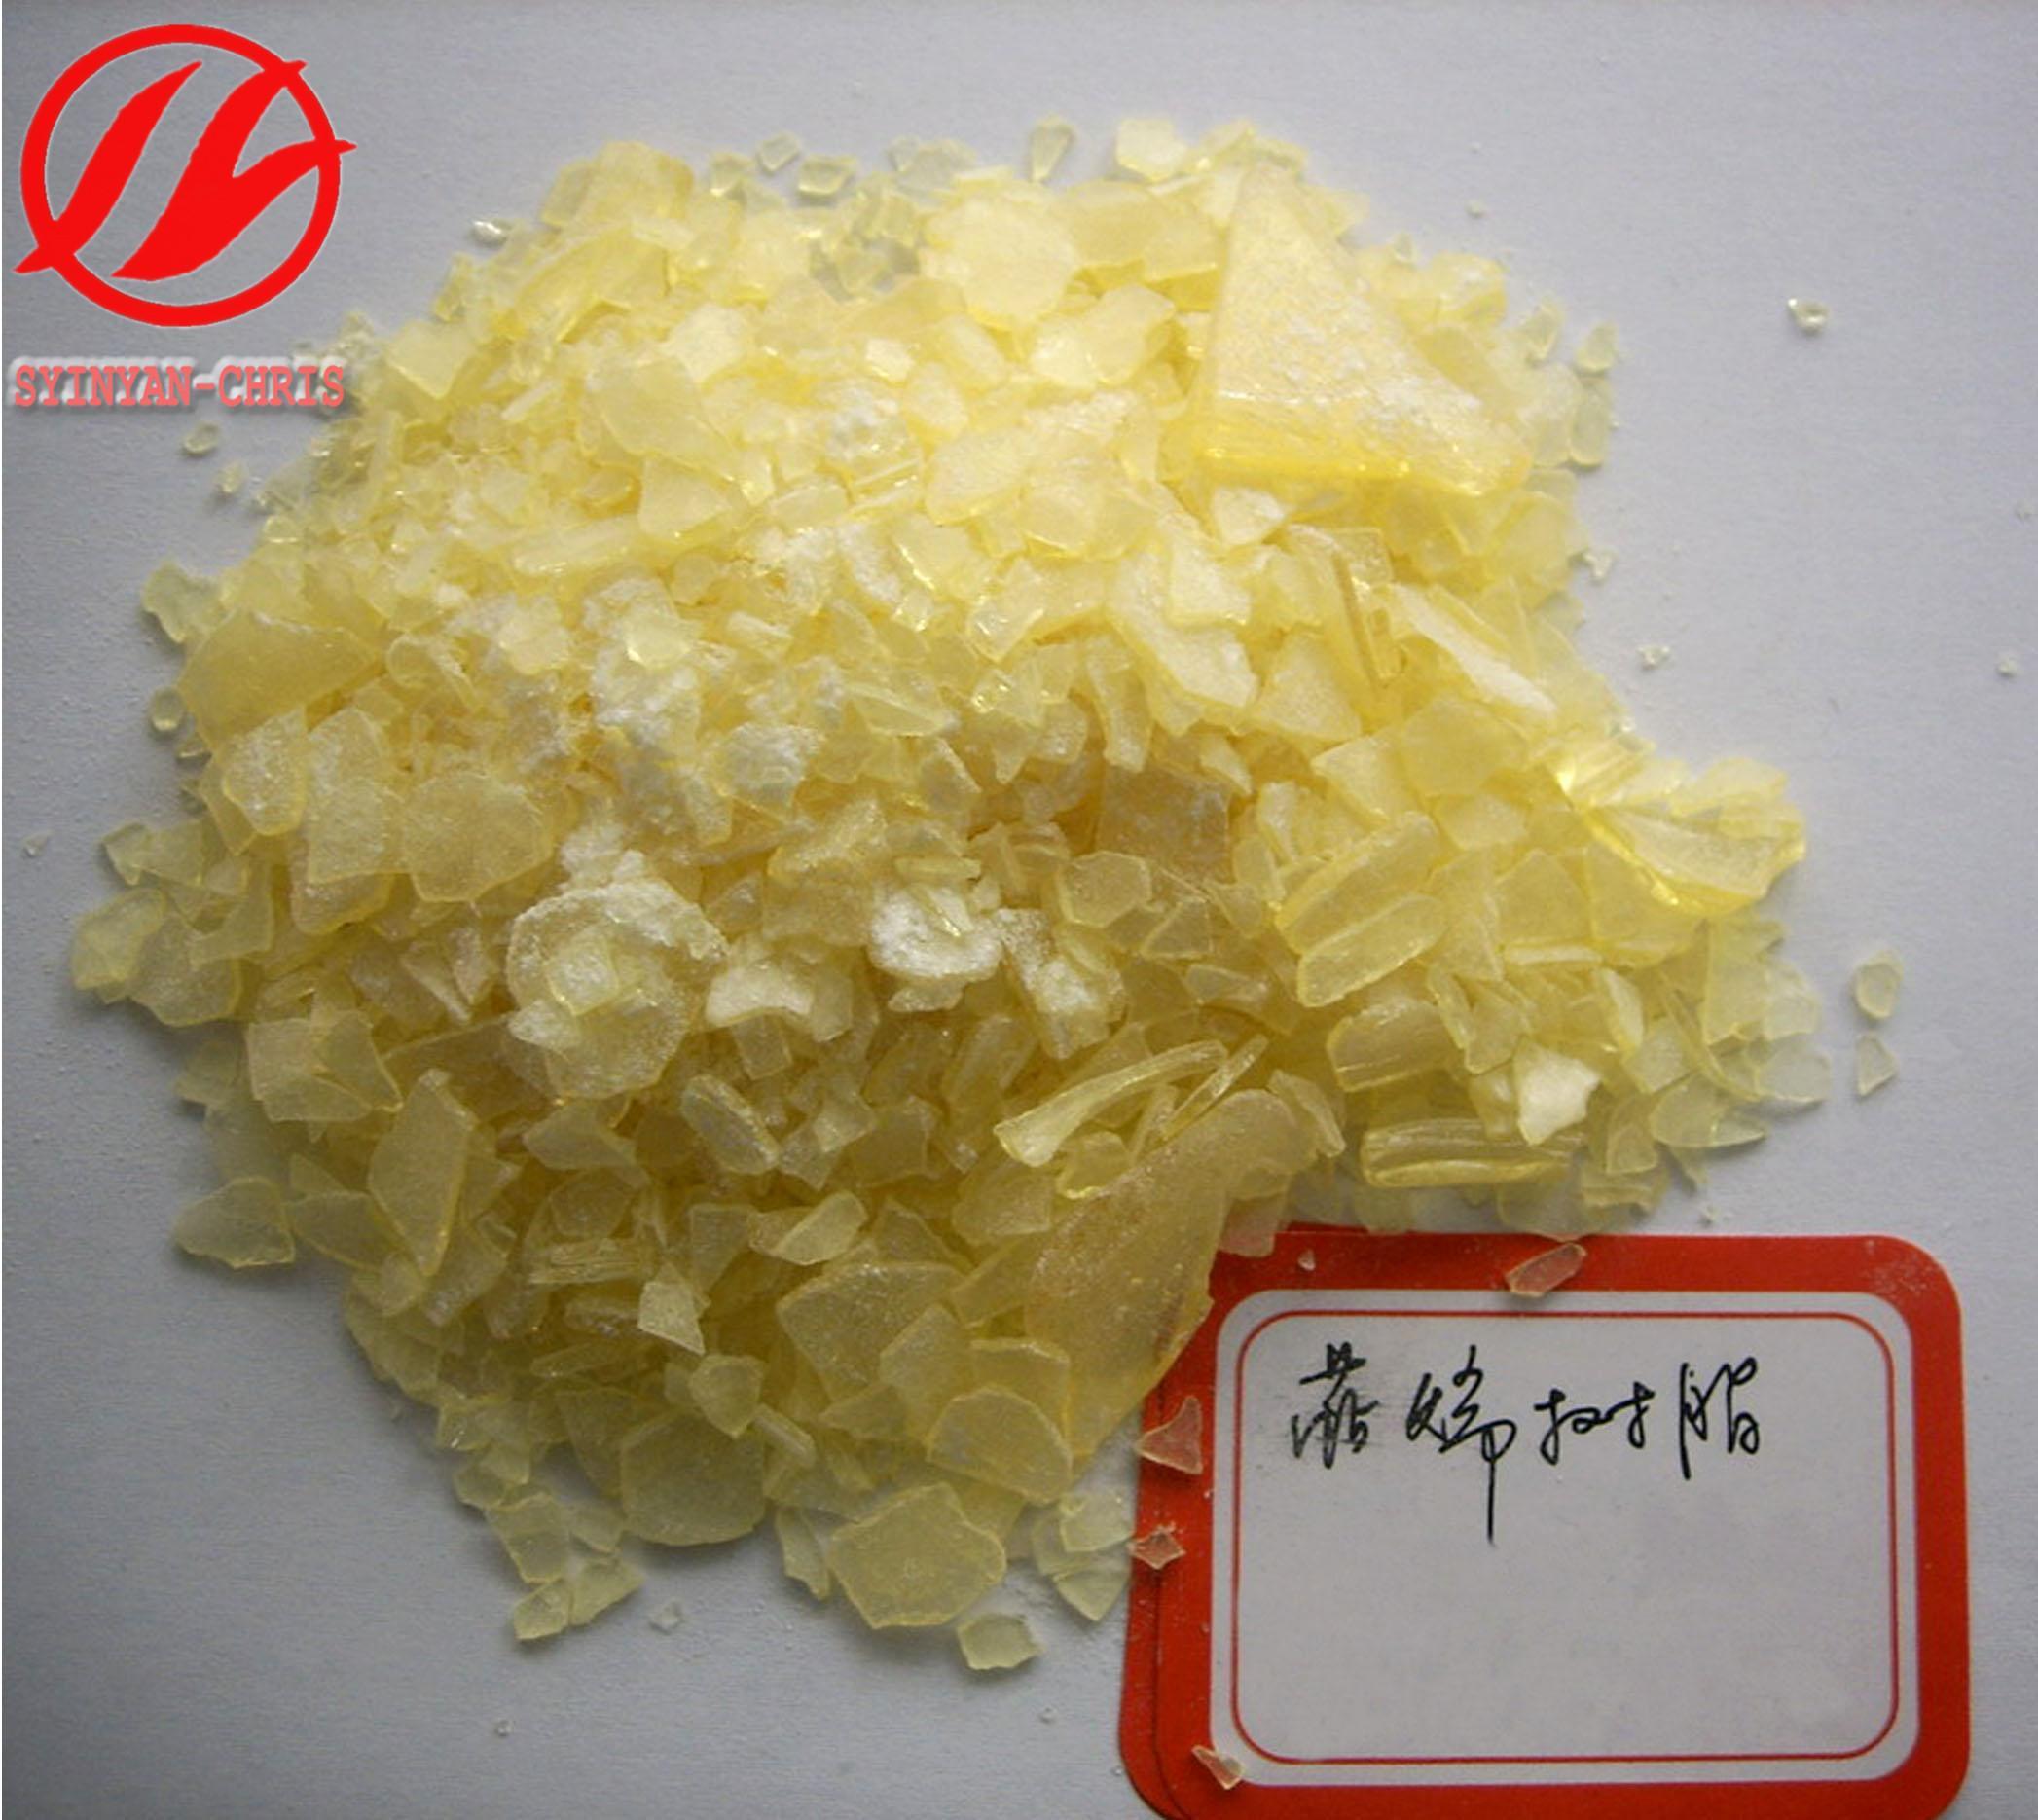 C9 Petroleum Resin for Coating Products